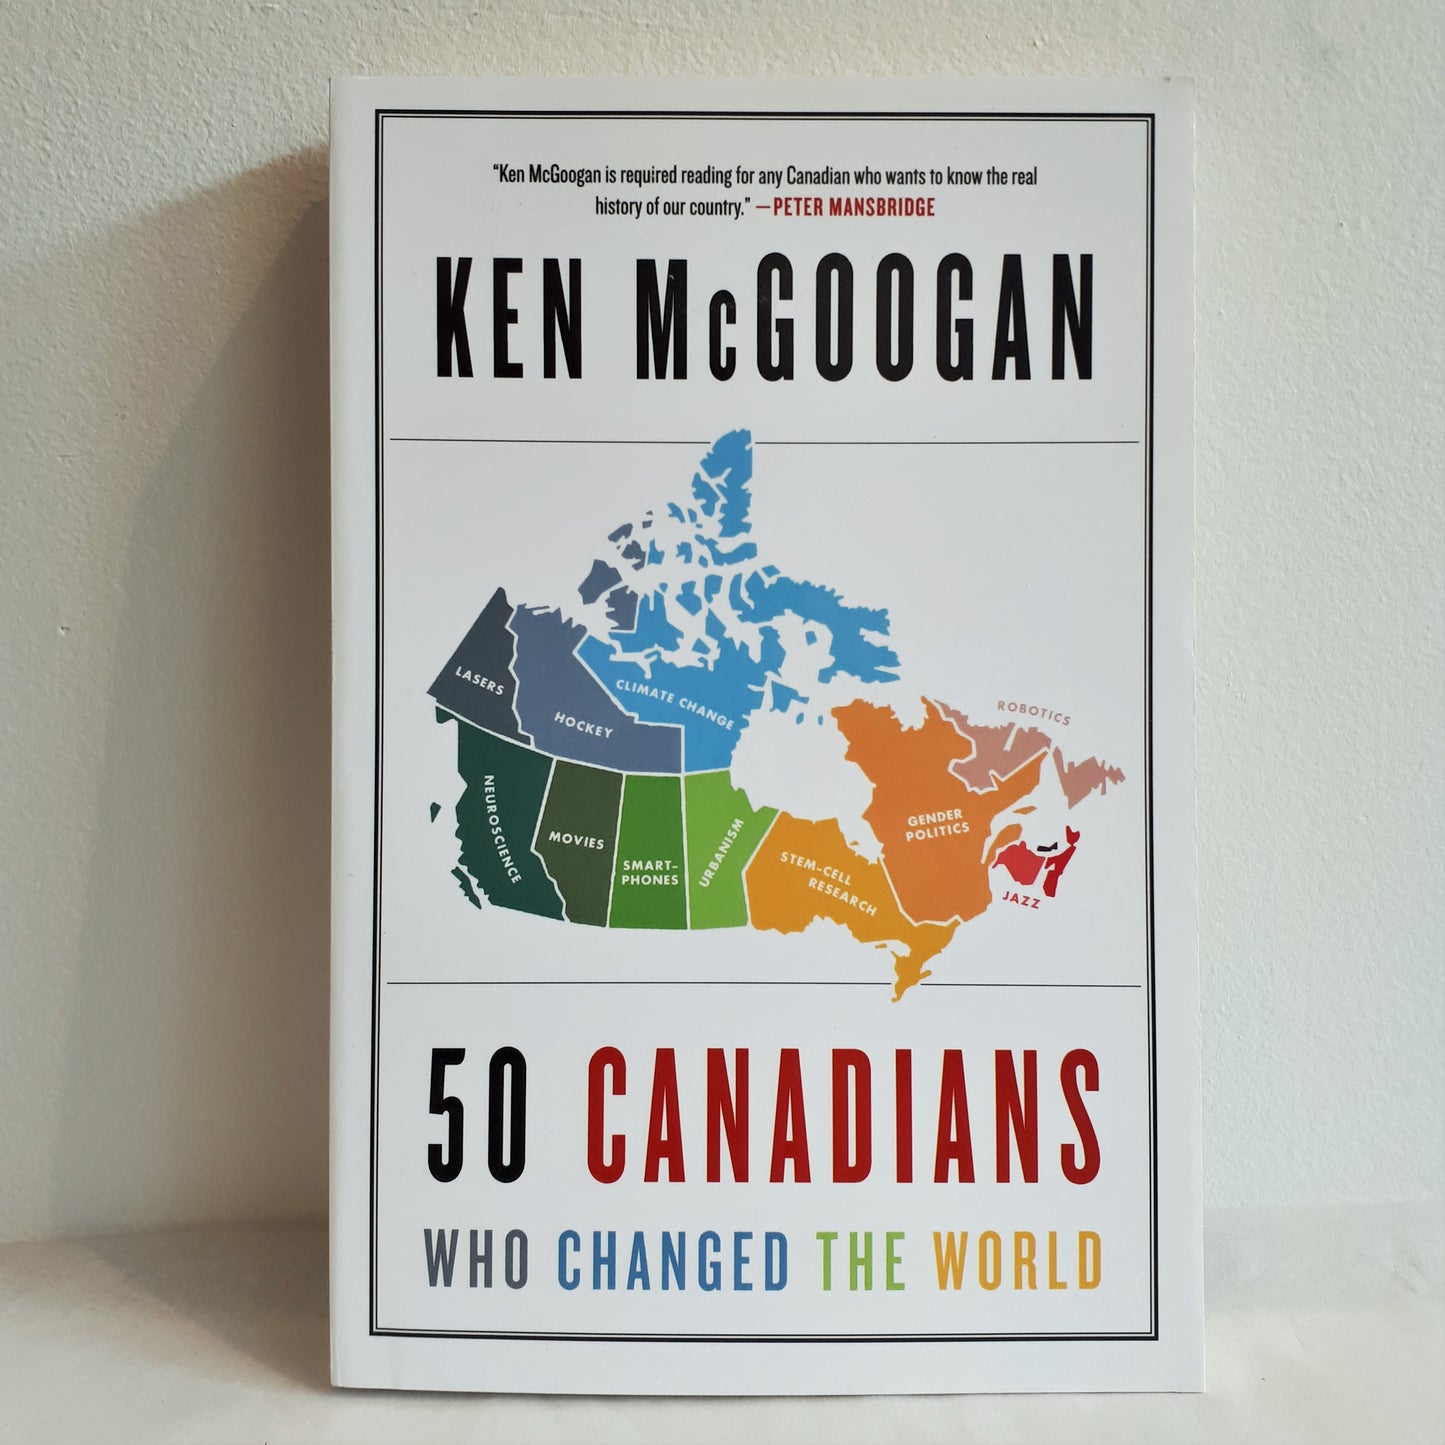 50 Canadians Who Changed The World by Ken McGoogan